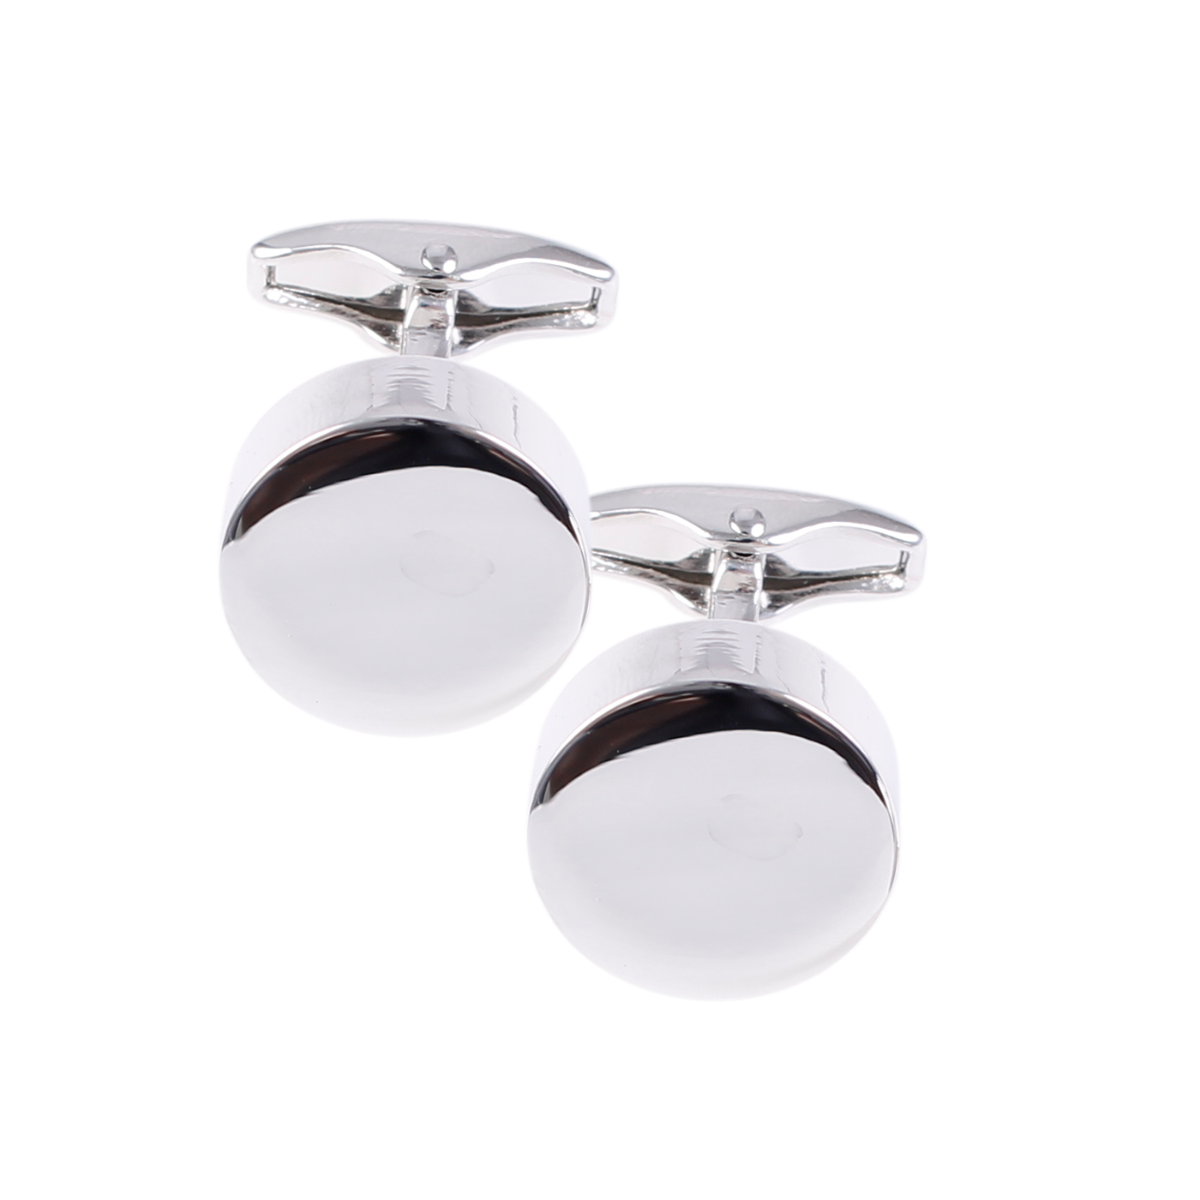 Classic Circle Silver-Plated Solid Brass Cufflinks by House of Amanda Christensen